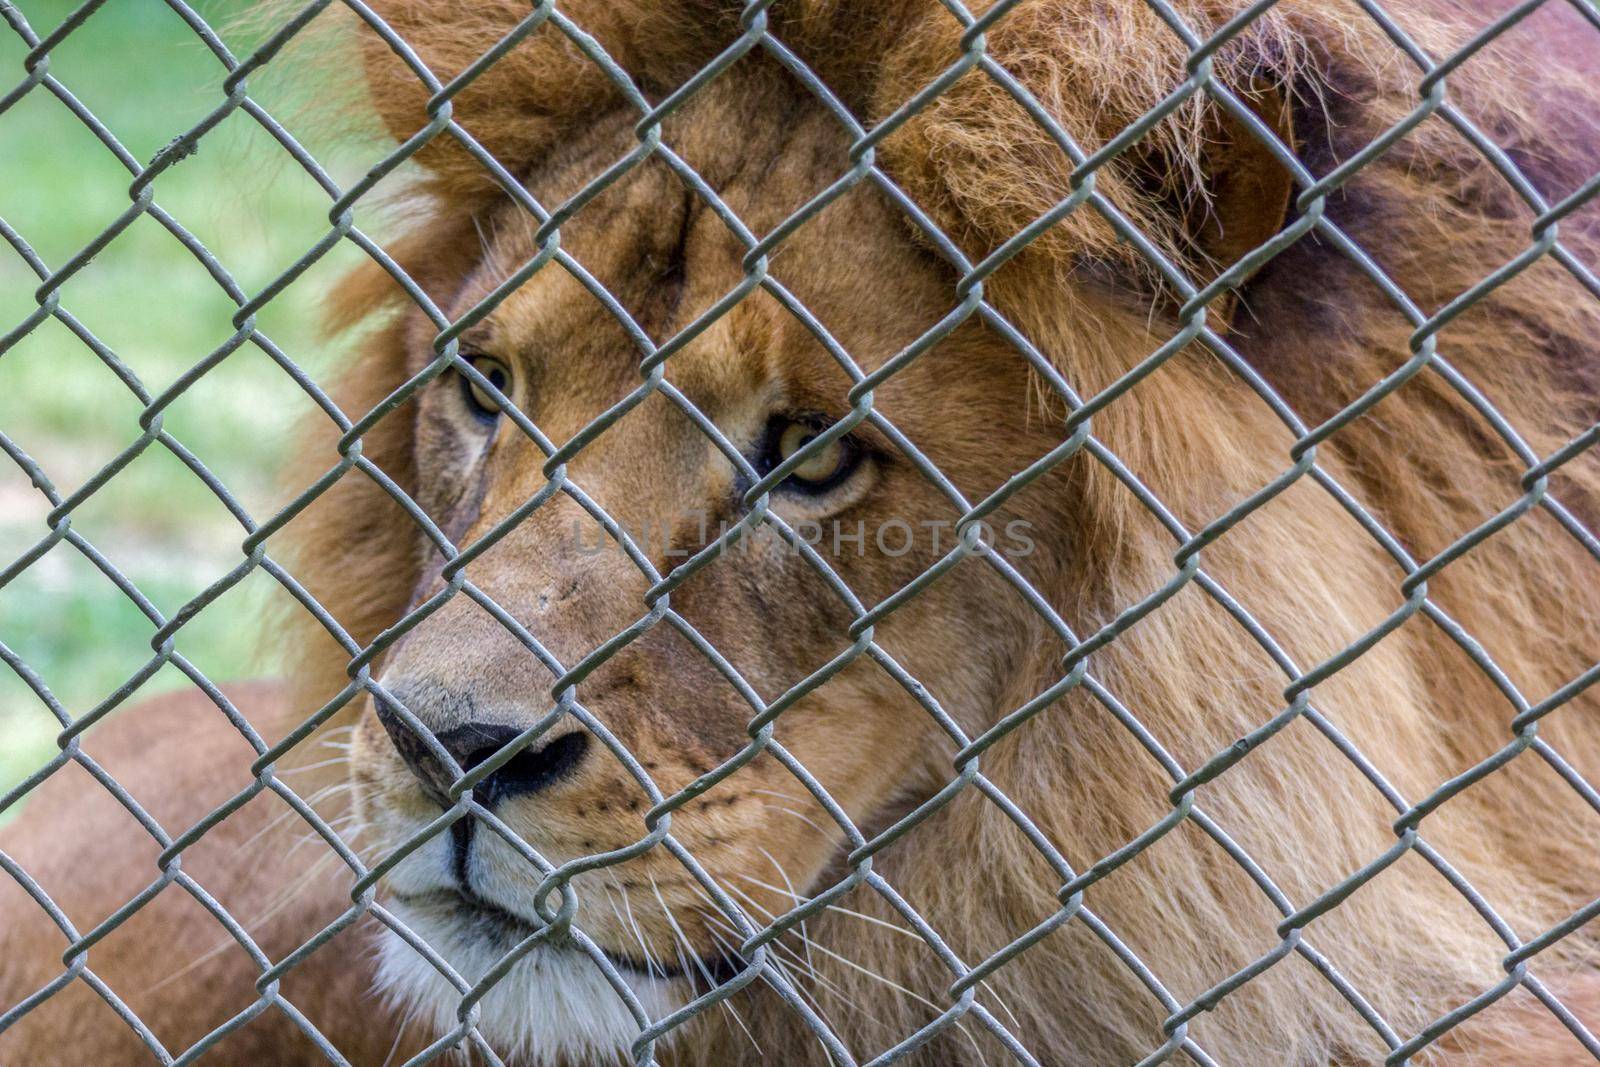 lion behind a fence in an Australian Zoo by bettercallcurry